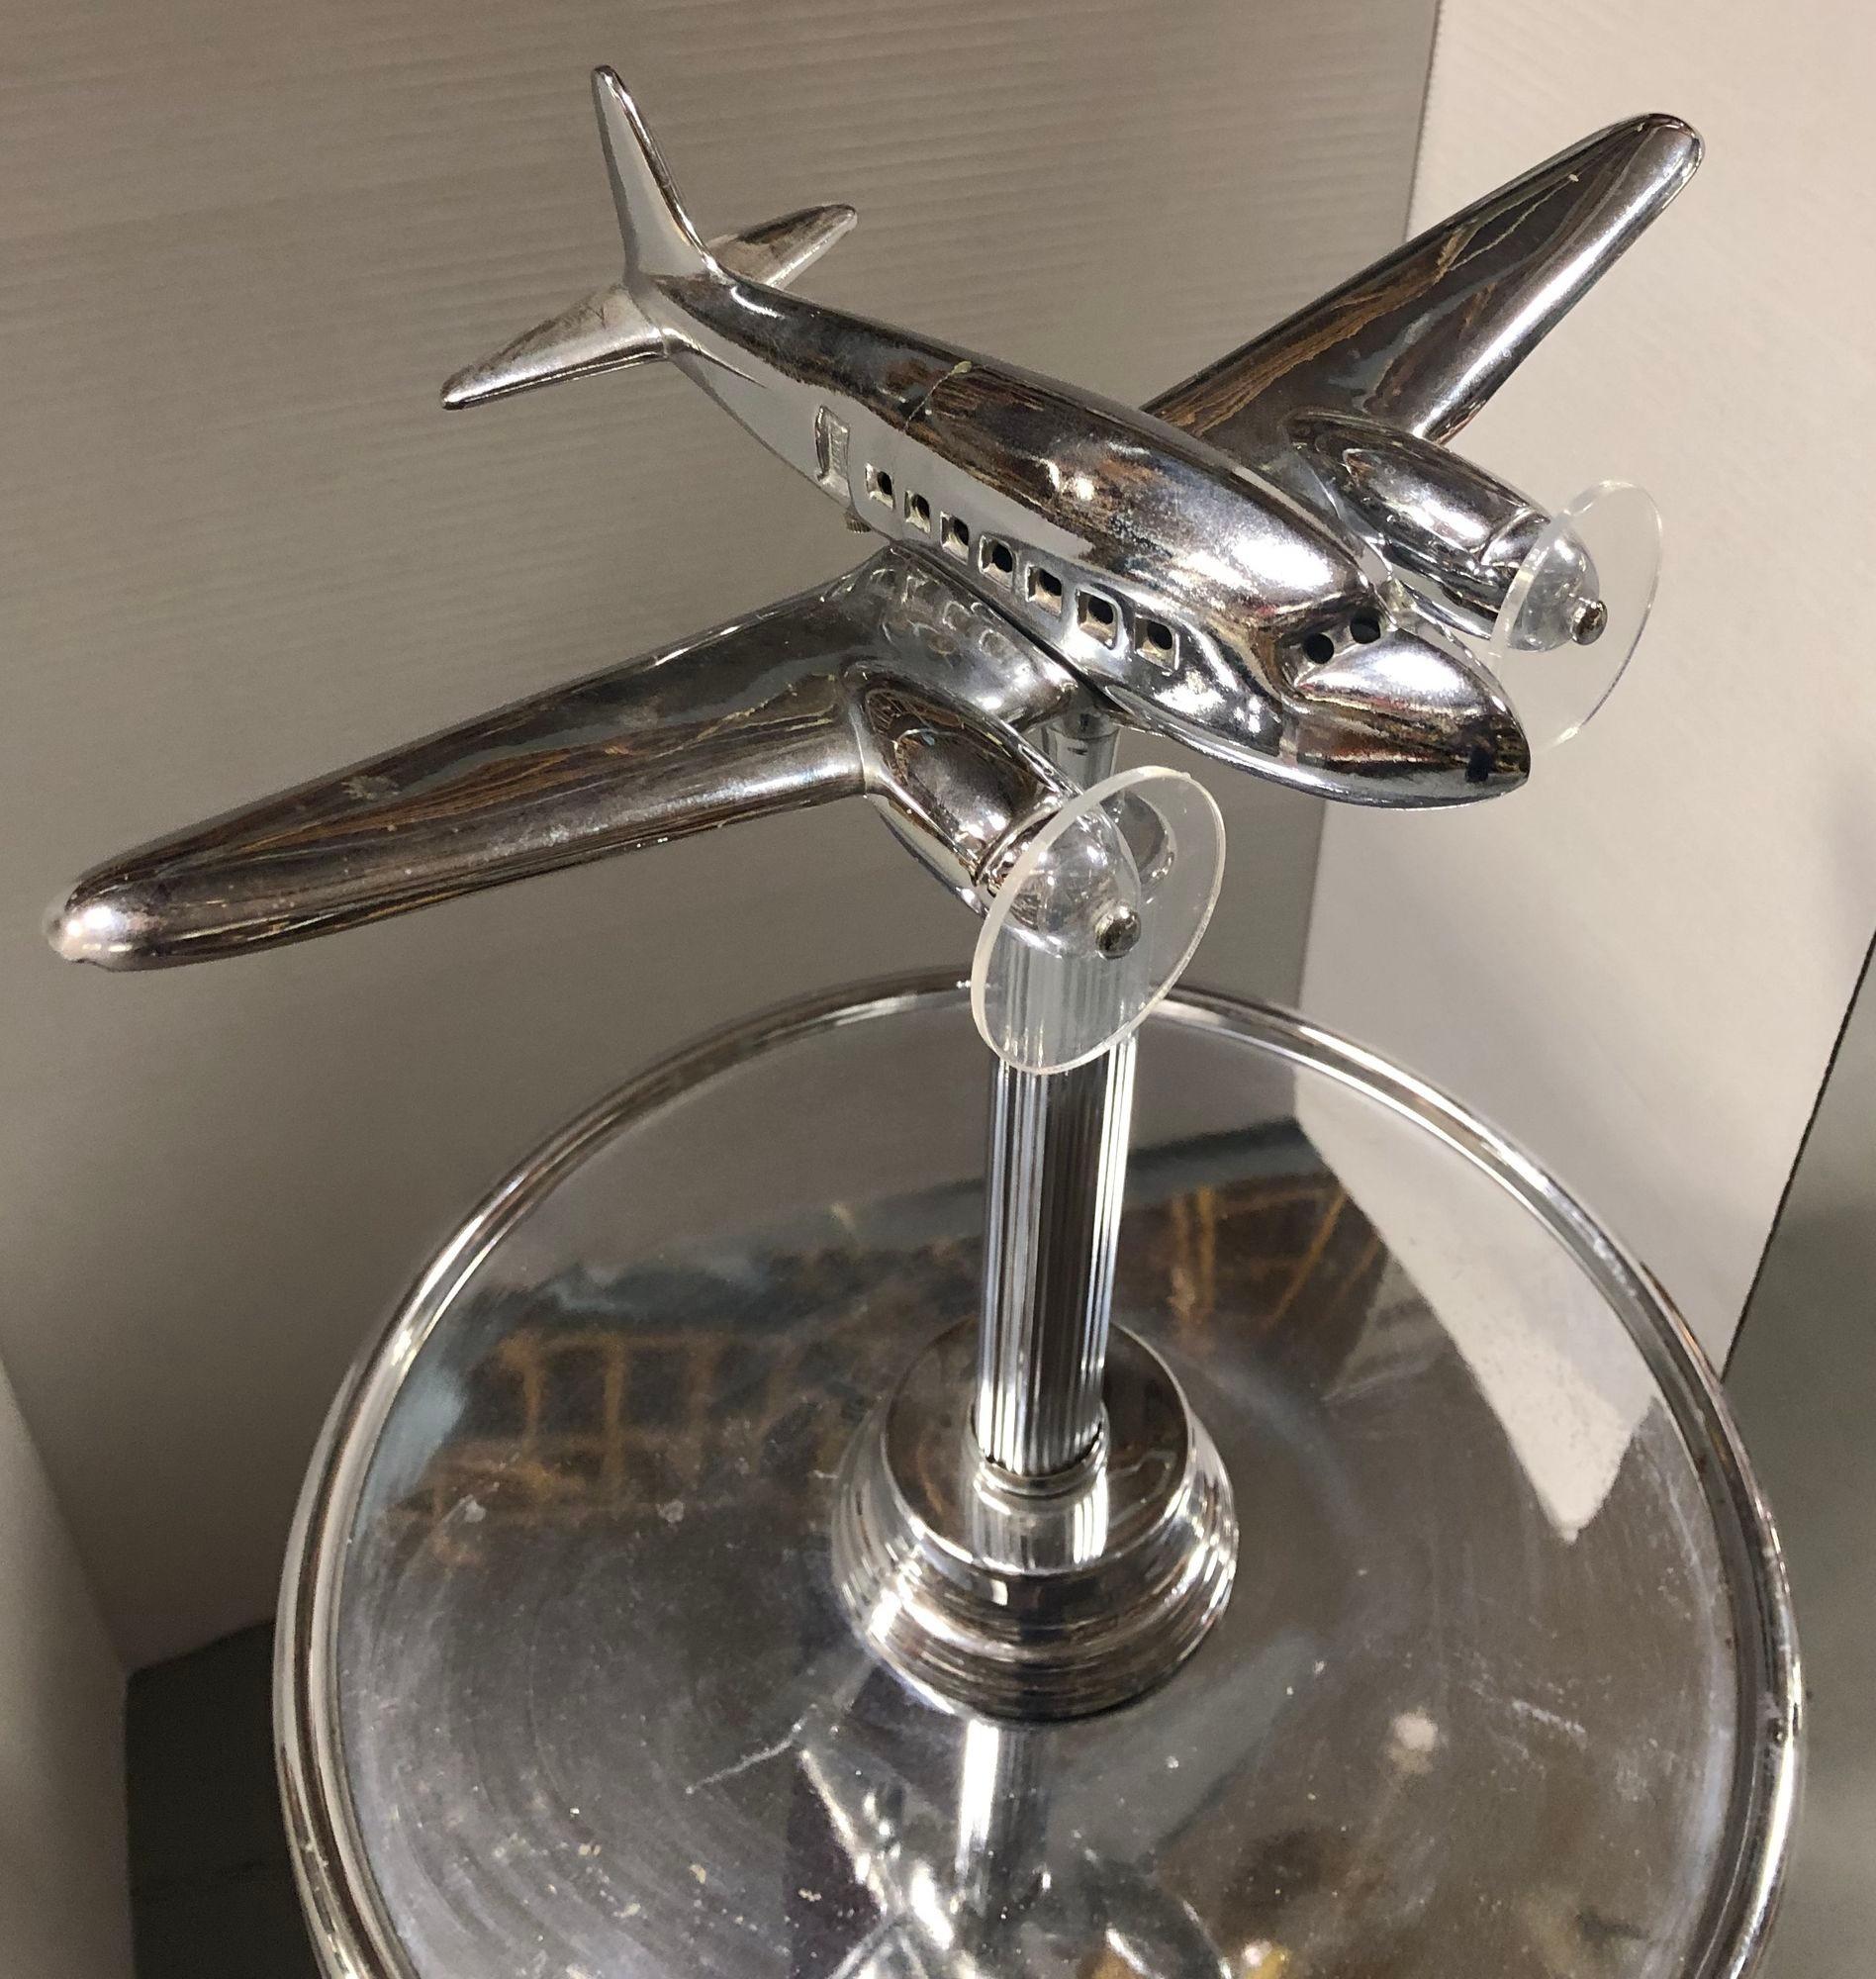 The Art Deco chrome lighted ashtray stand lamp epitomizes 1920s luxury and functionality. This dual-purpose piece boasts a geometric chrome design, blending elegance and practicality. With its integrated lighting and ashtray, it's a stylish